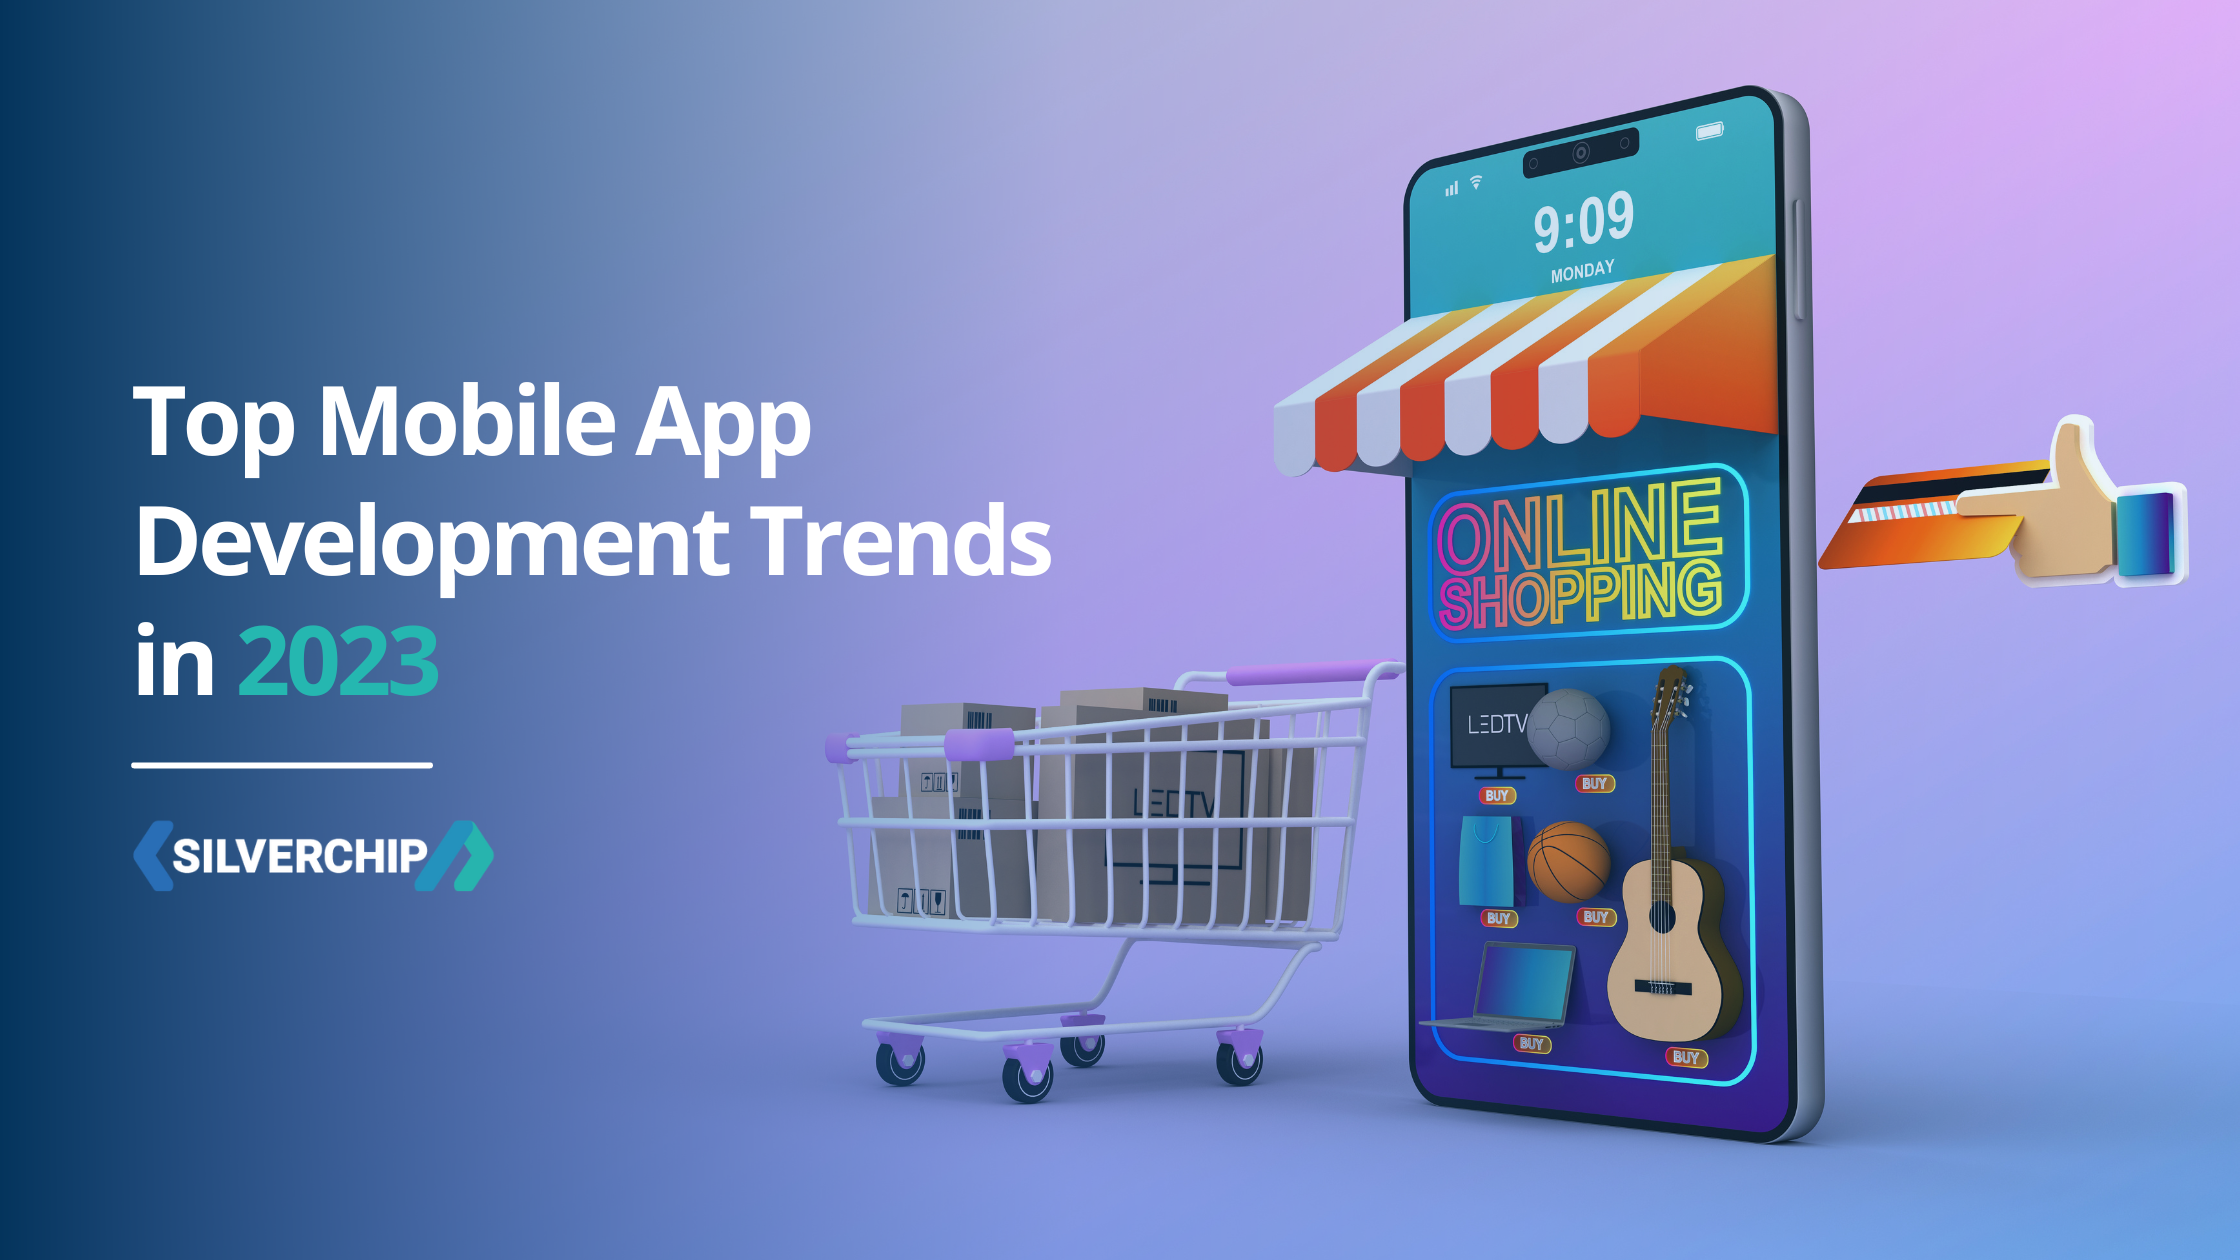 The Top Mobile App Trends We Expect to See in 2023